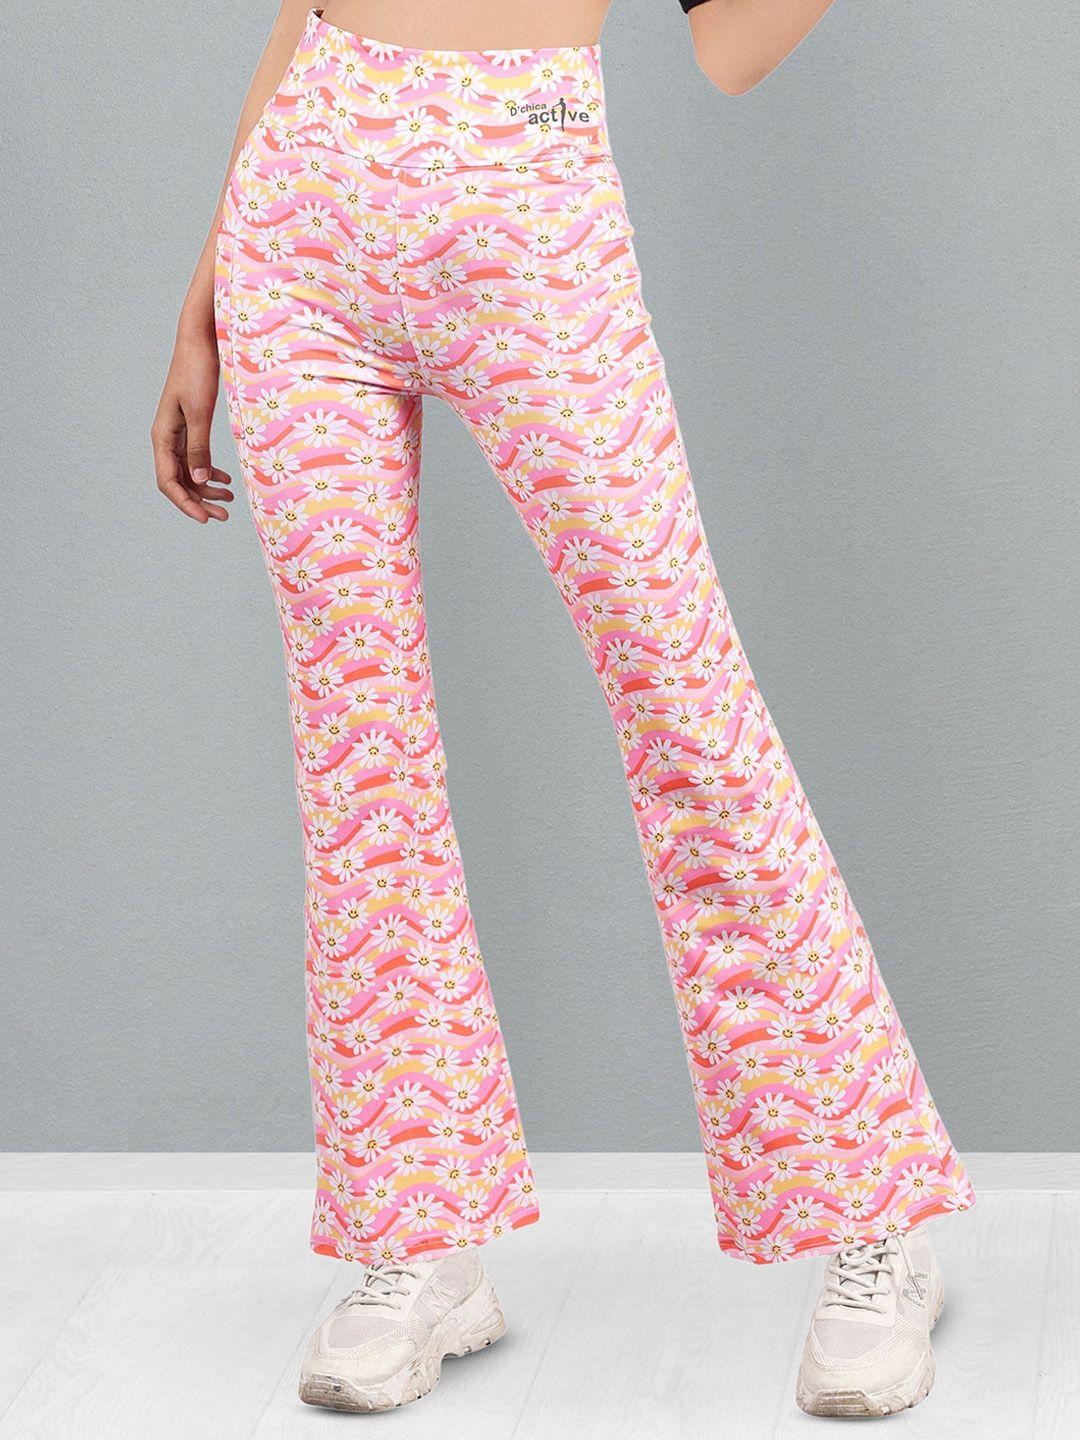 dchica-girls-floral-printed-flared-sports-track-pants